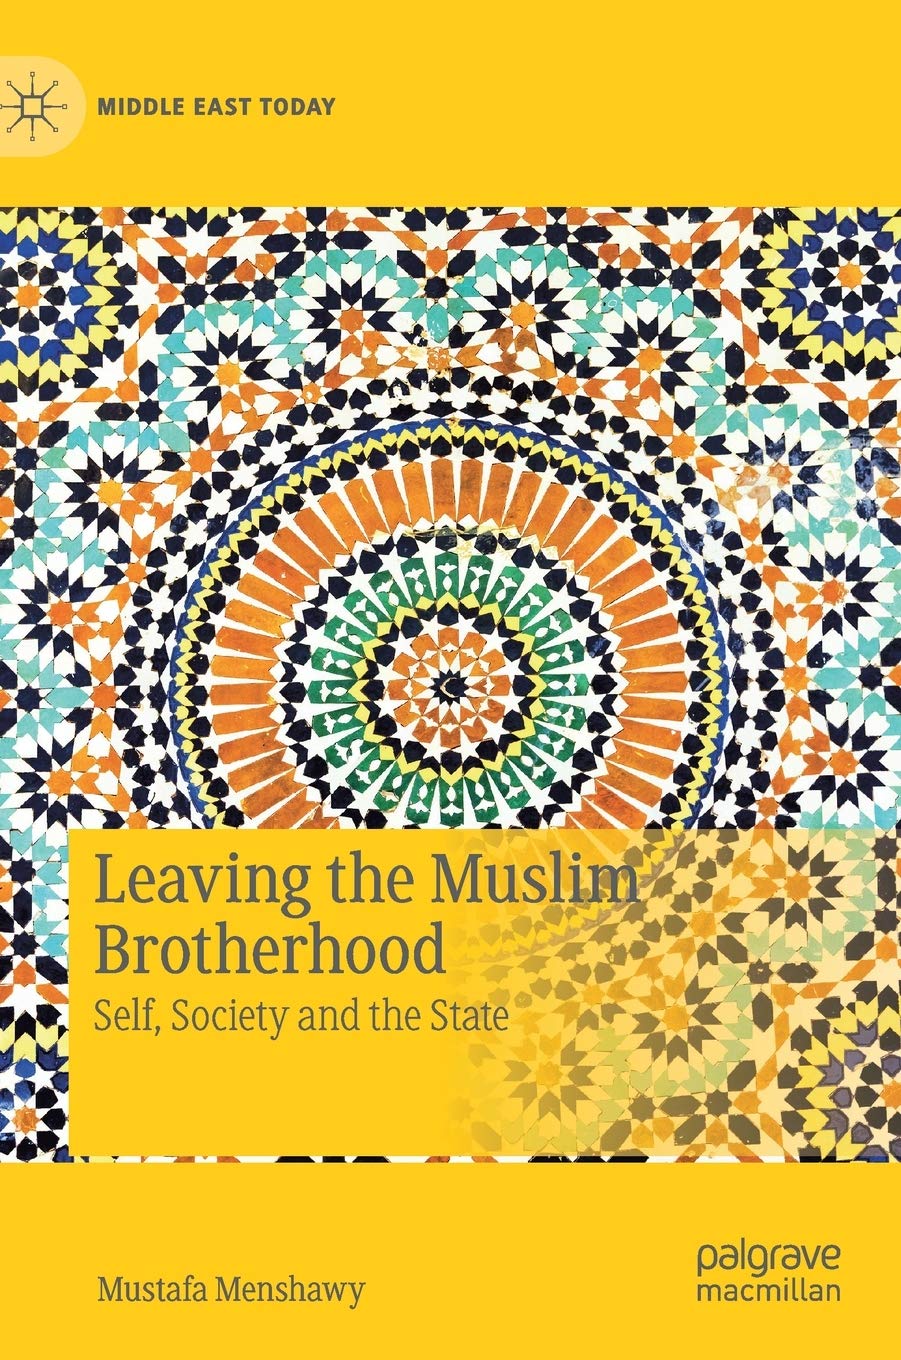 Cover of Mustafa Menshawy's "Leaving the Muslim Brotherhood: Self, Society, and the State" (published by Palgrave MacmIllan)